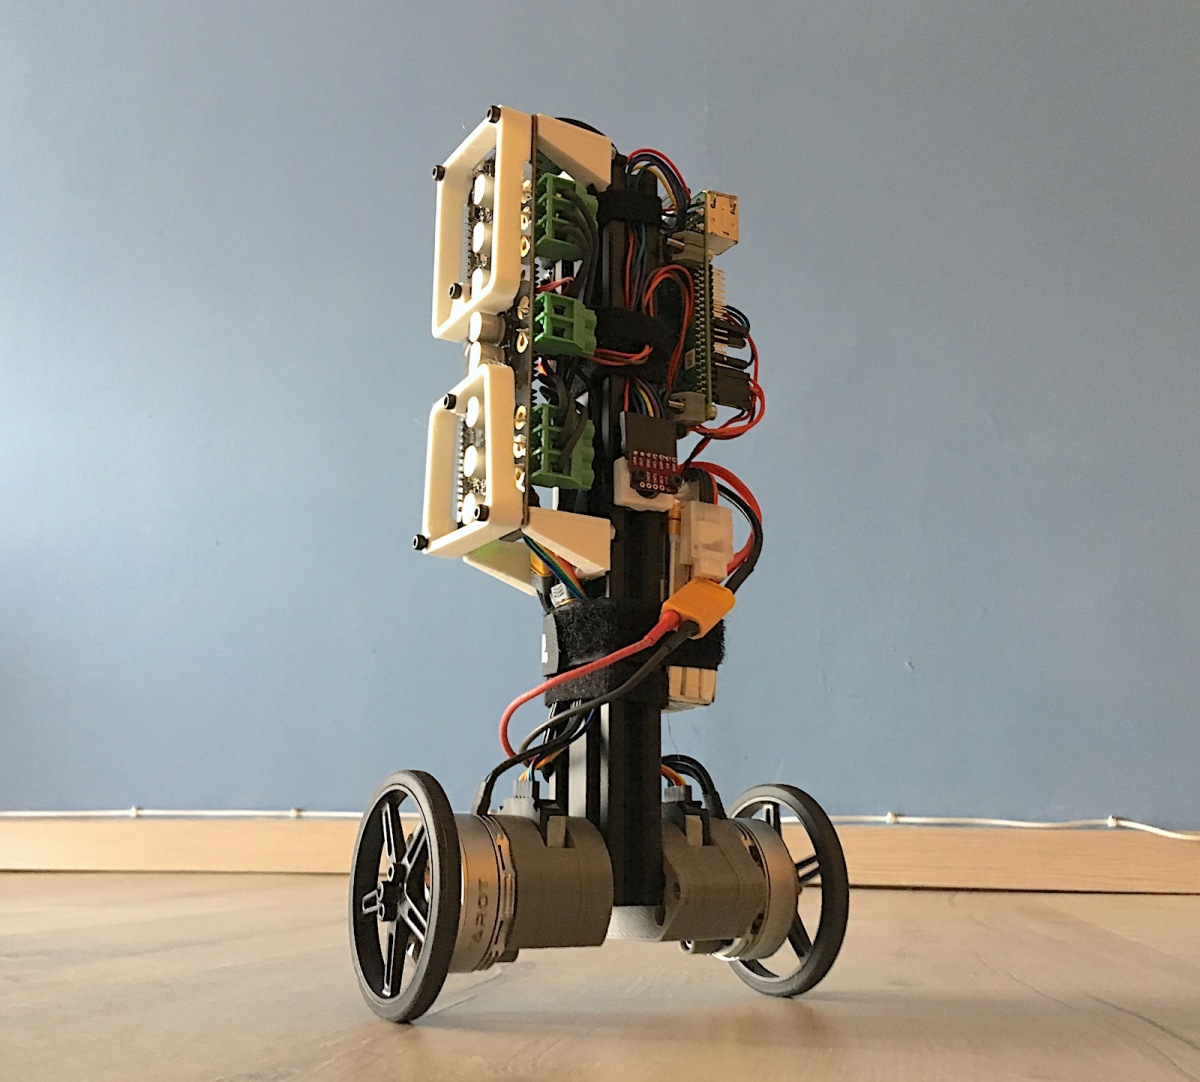 Designing and Building an Agile Inverted Pendulum Robot